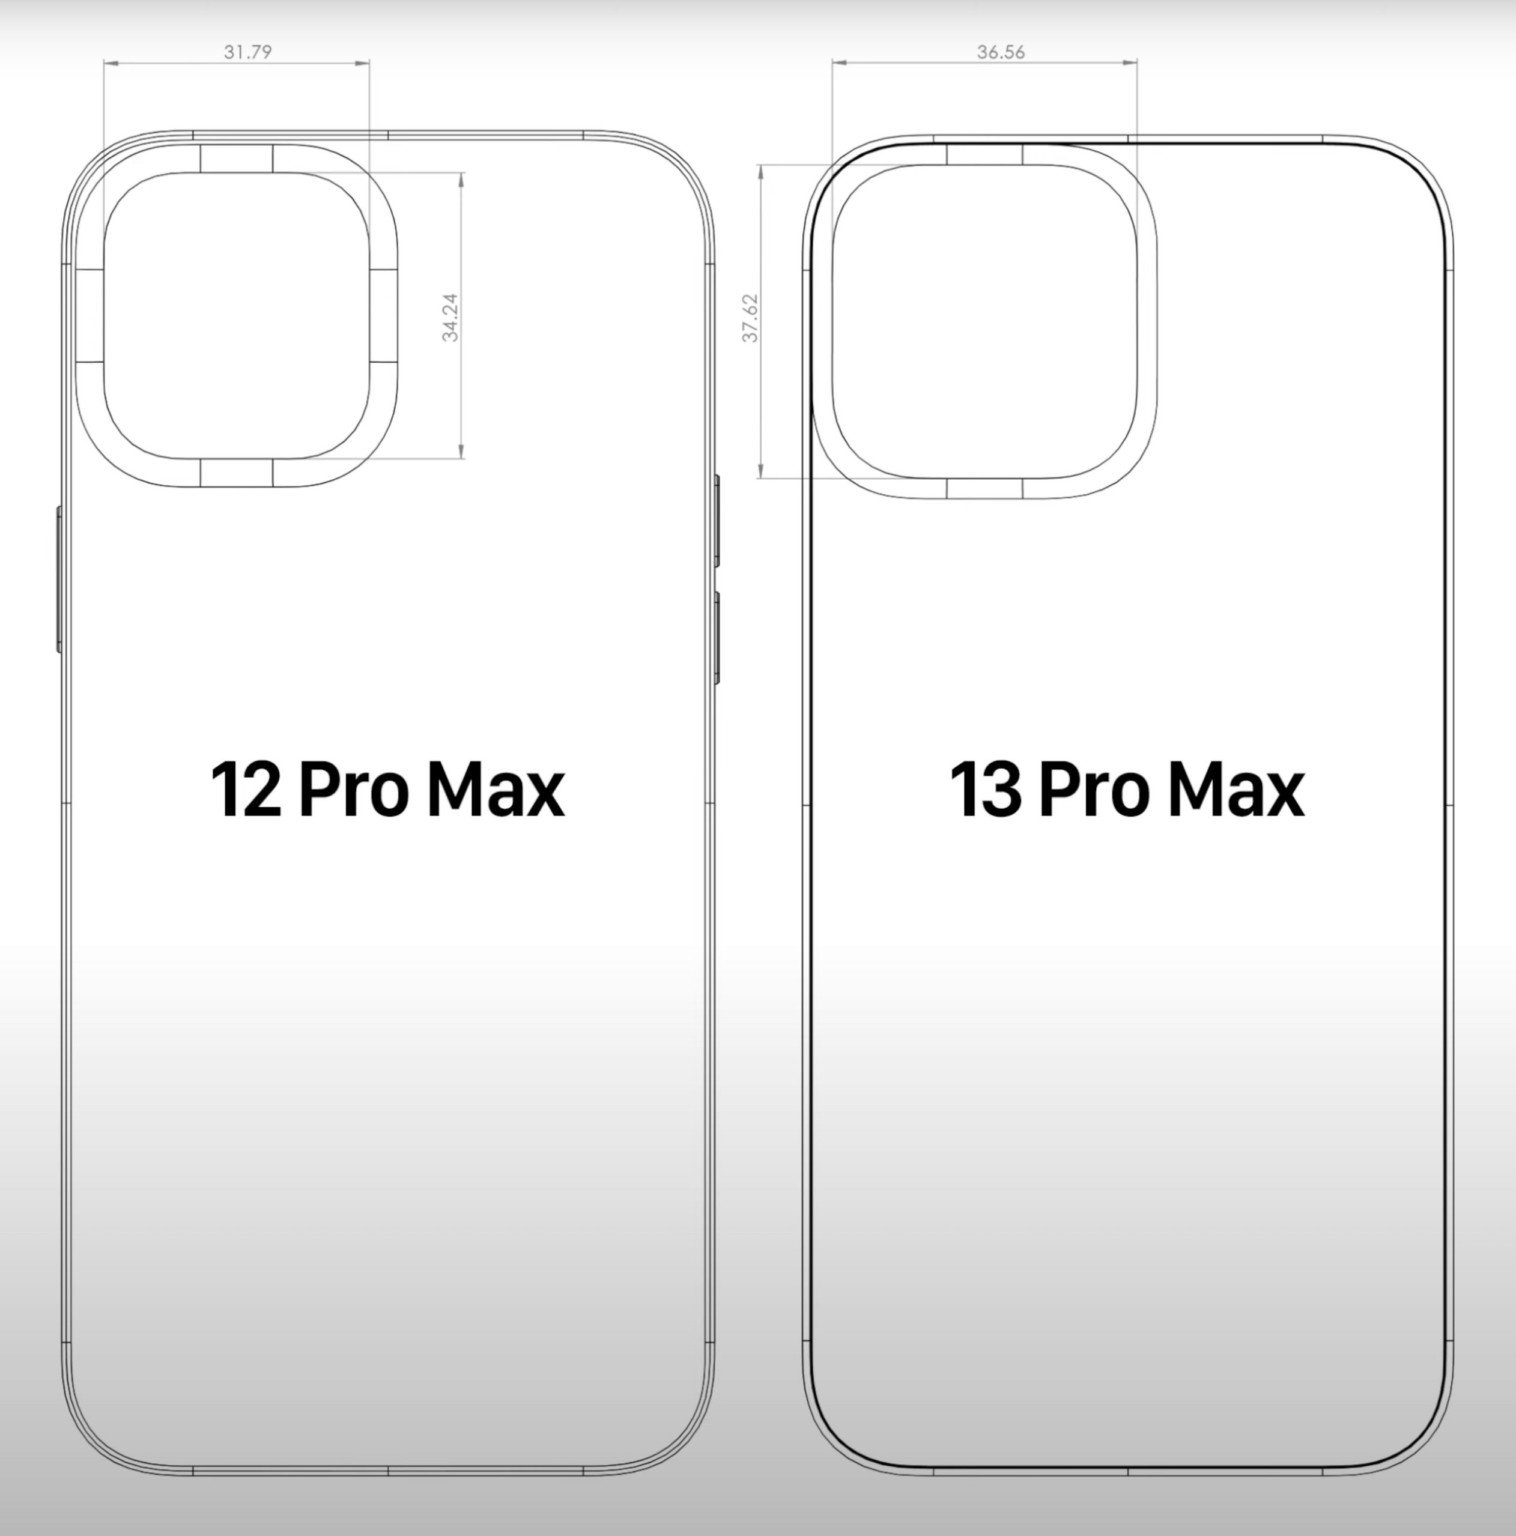 iphone 11 pro max size in inches